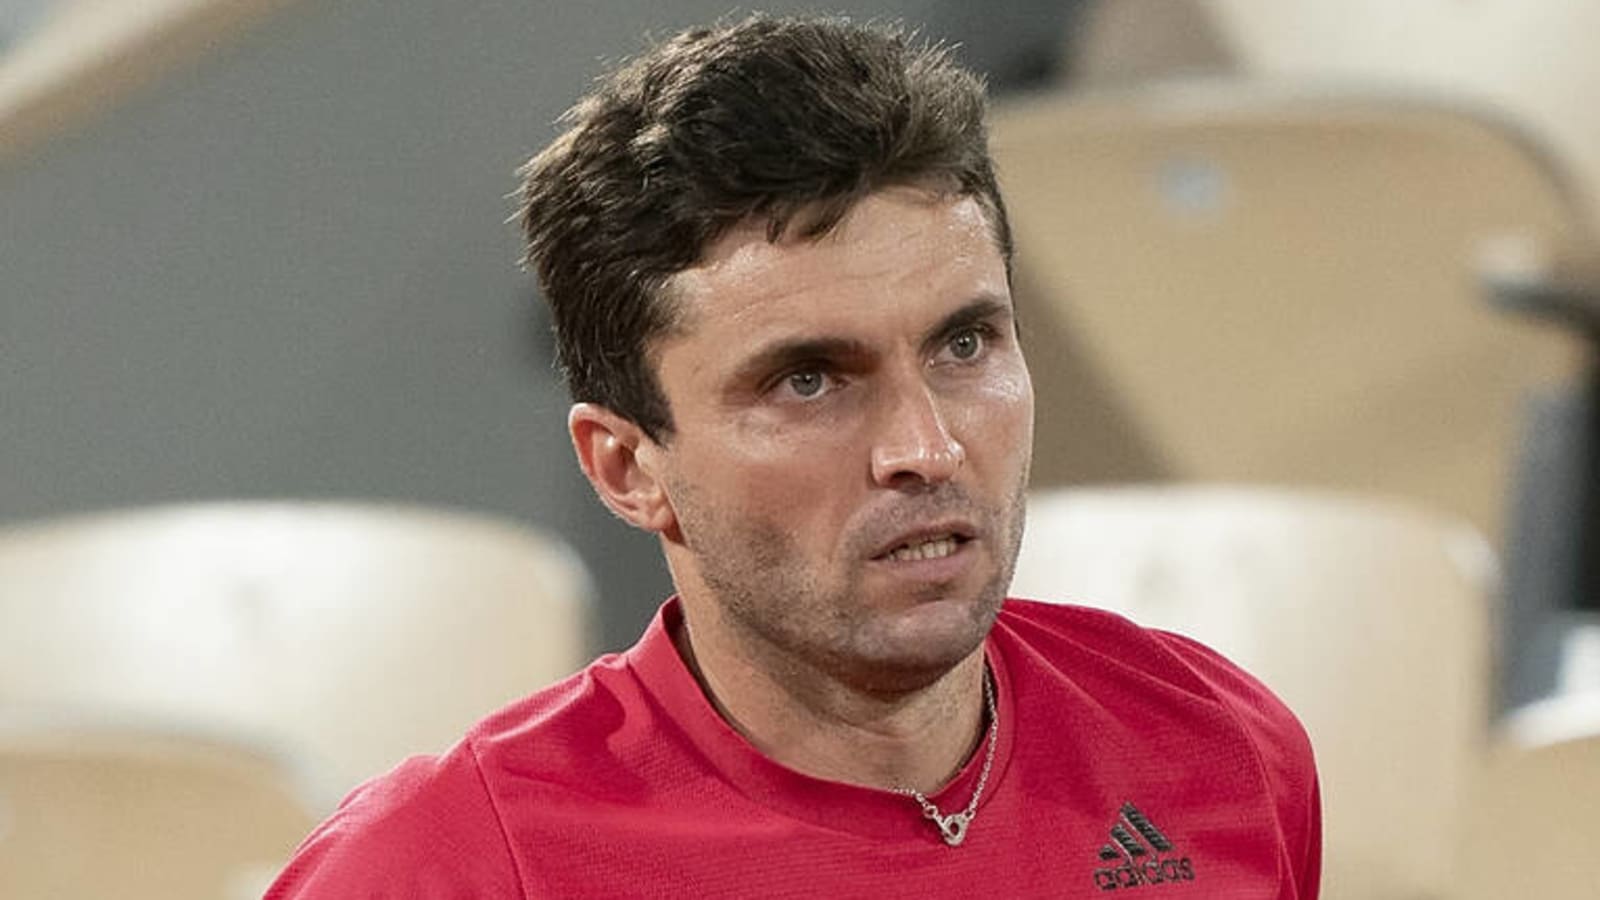 'A hard worker with much talent in his early years,' French legend Gilles Simon reacts to Rafael Nadal’s football skills in Rome